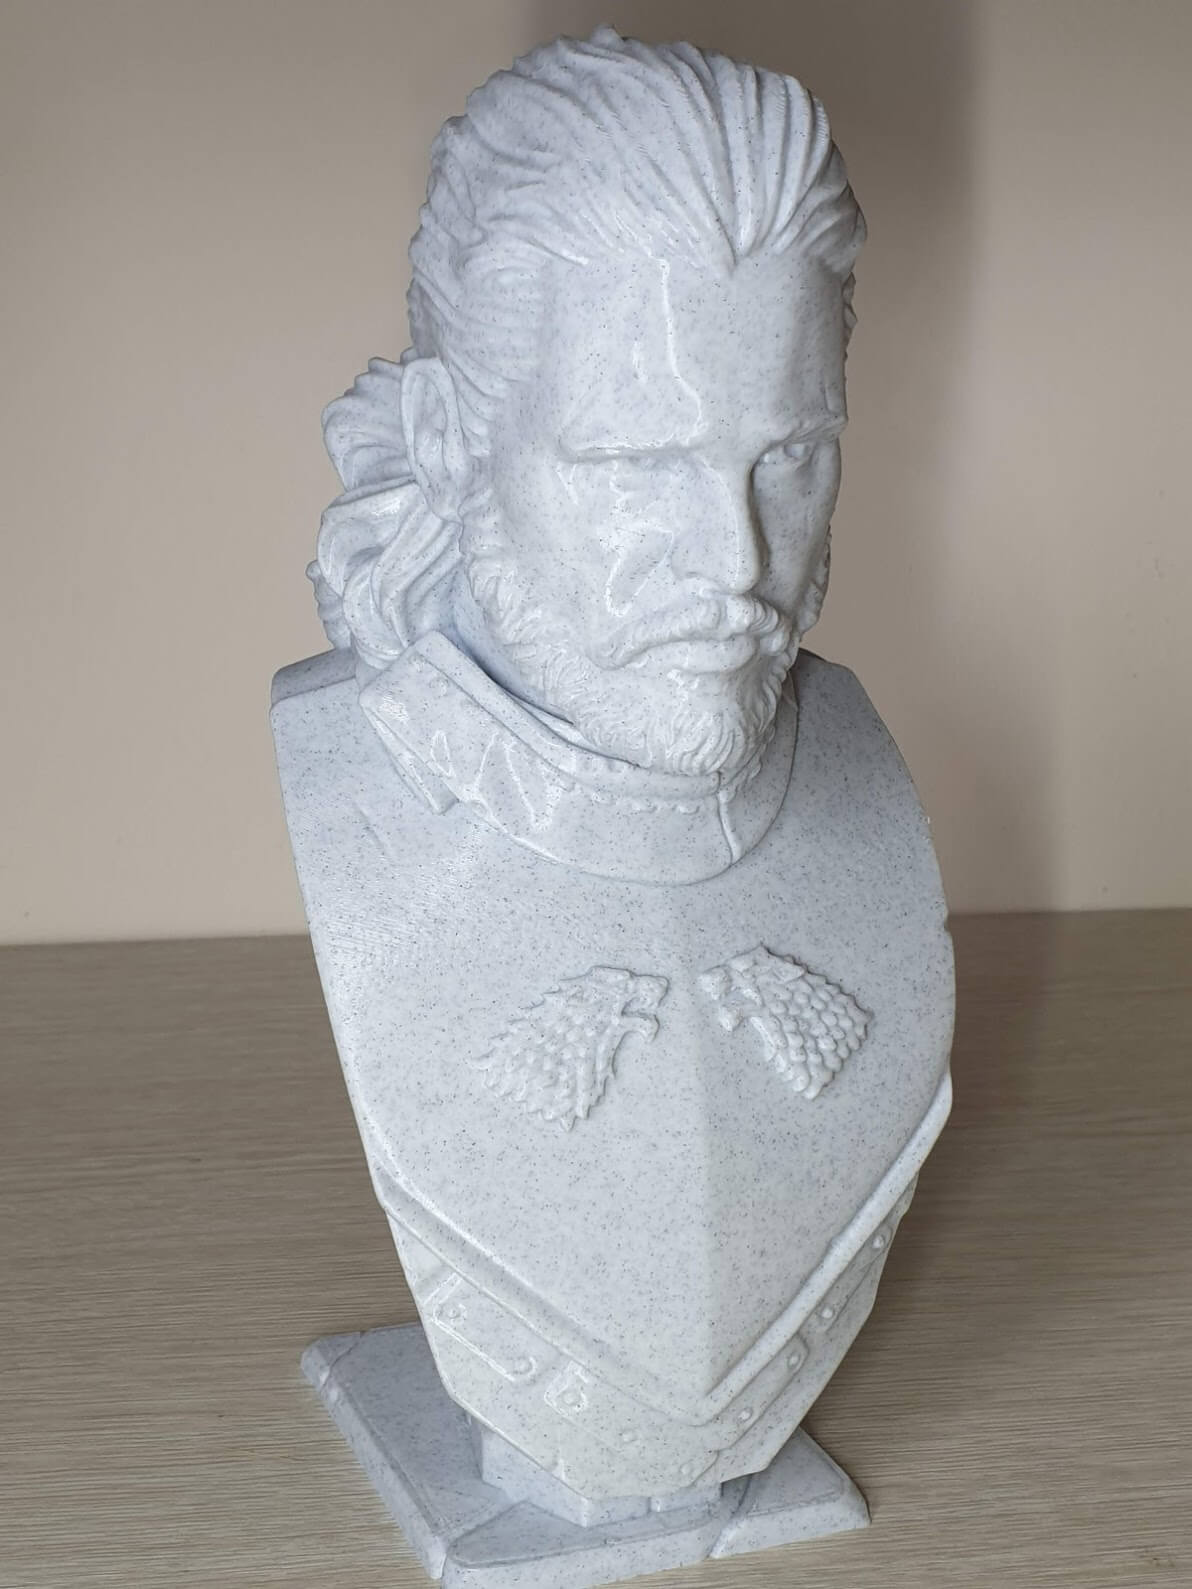 13 Free 3D Printing Ideas For Beginners - Eastman Bust 1